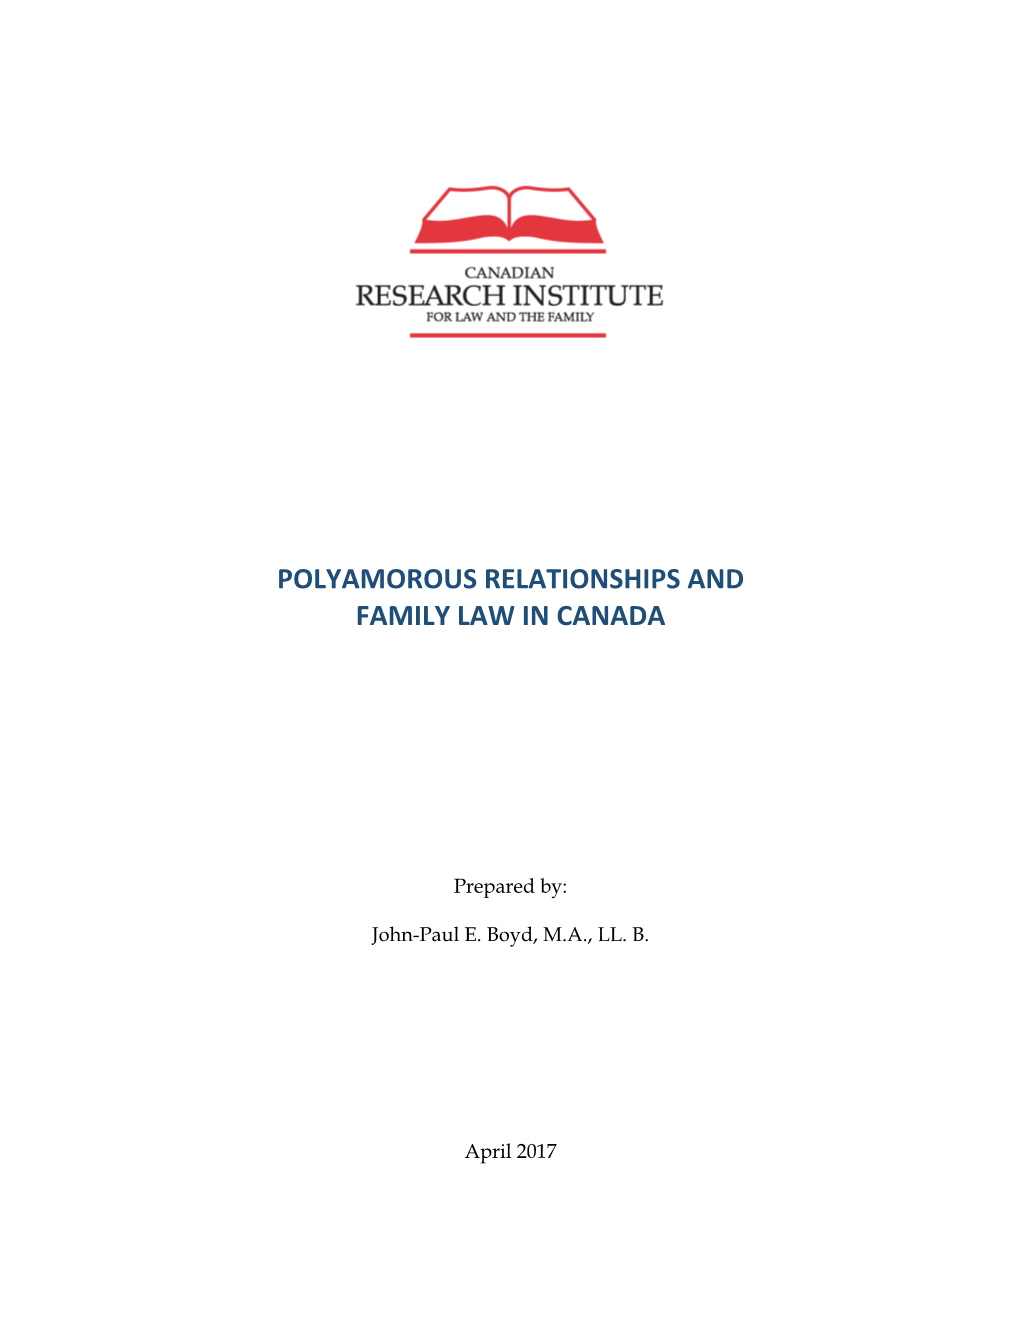 Polyamorous Relationships and Family Law in Canada